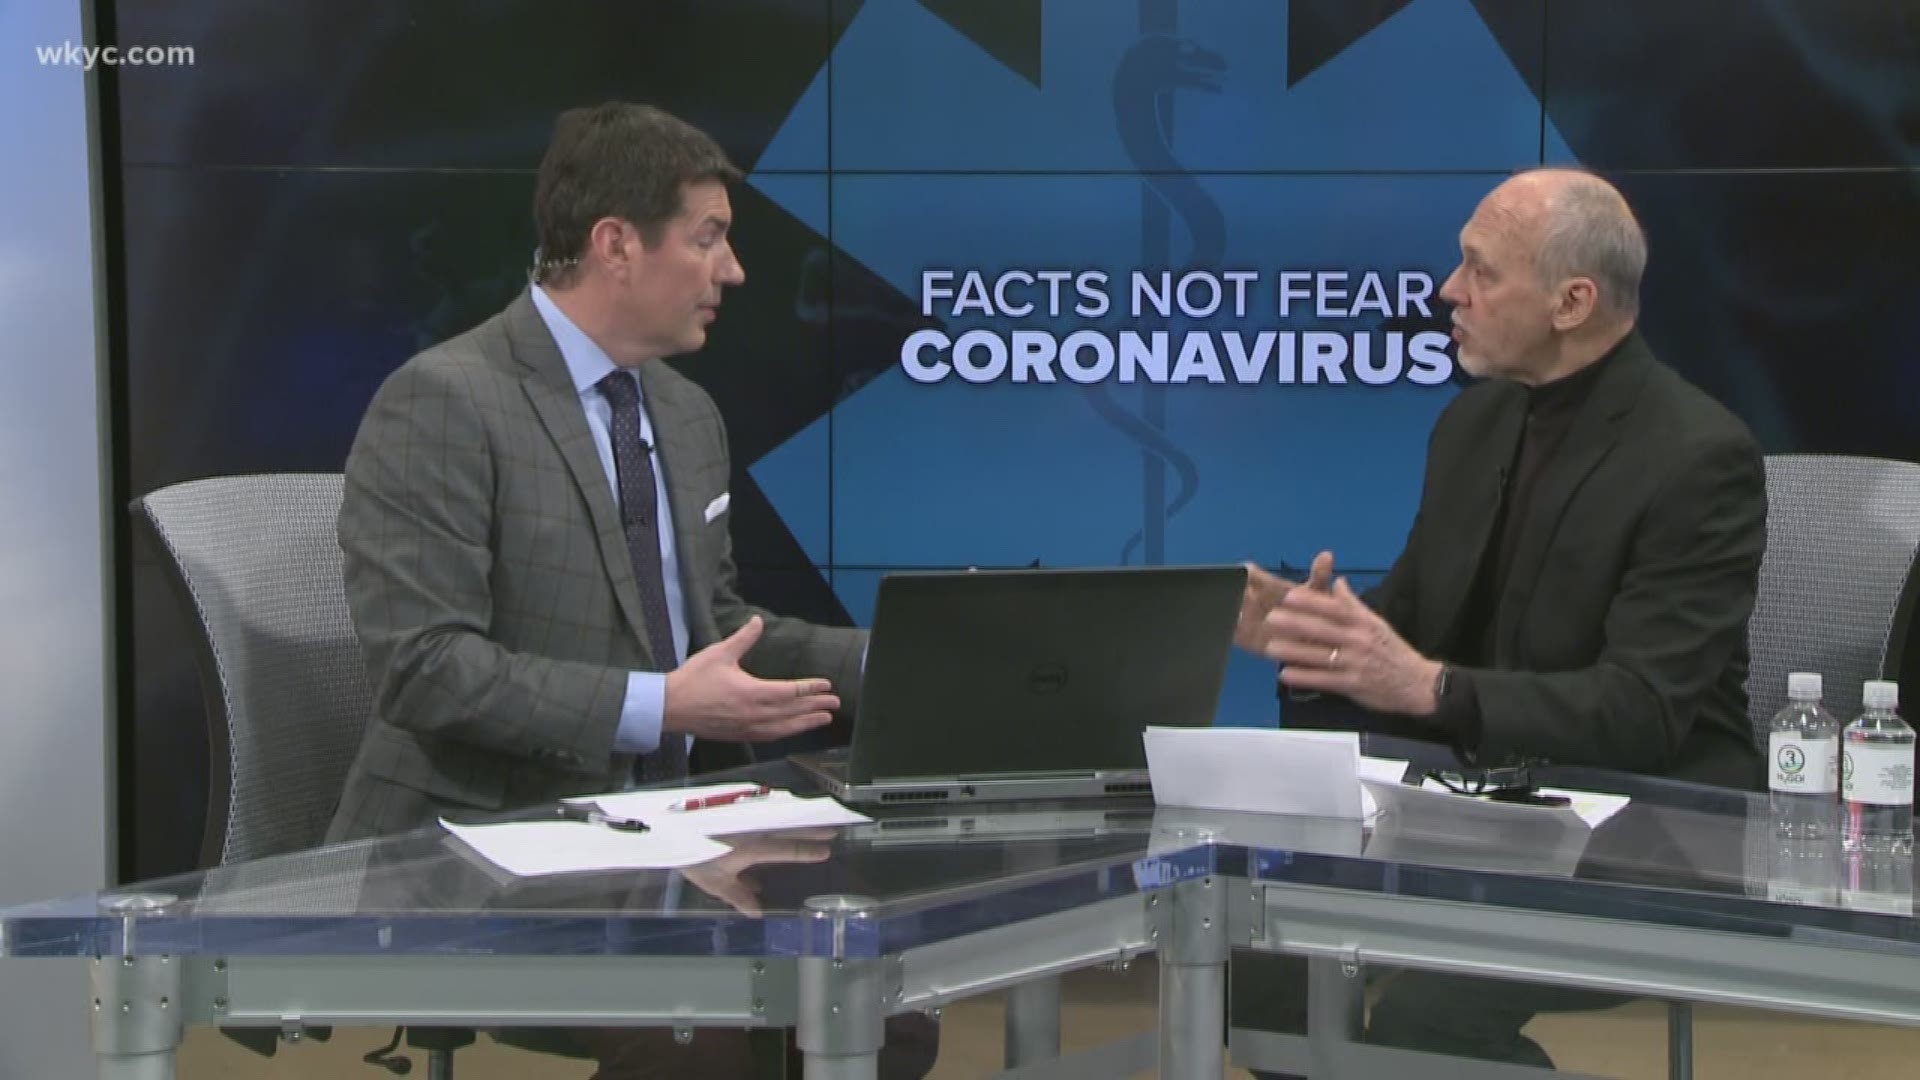 From mass gatherings to questions about social distancing, Dr. Sroka offers his thoughts on the current coronavirus situation.